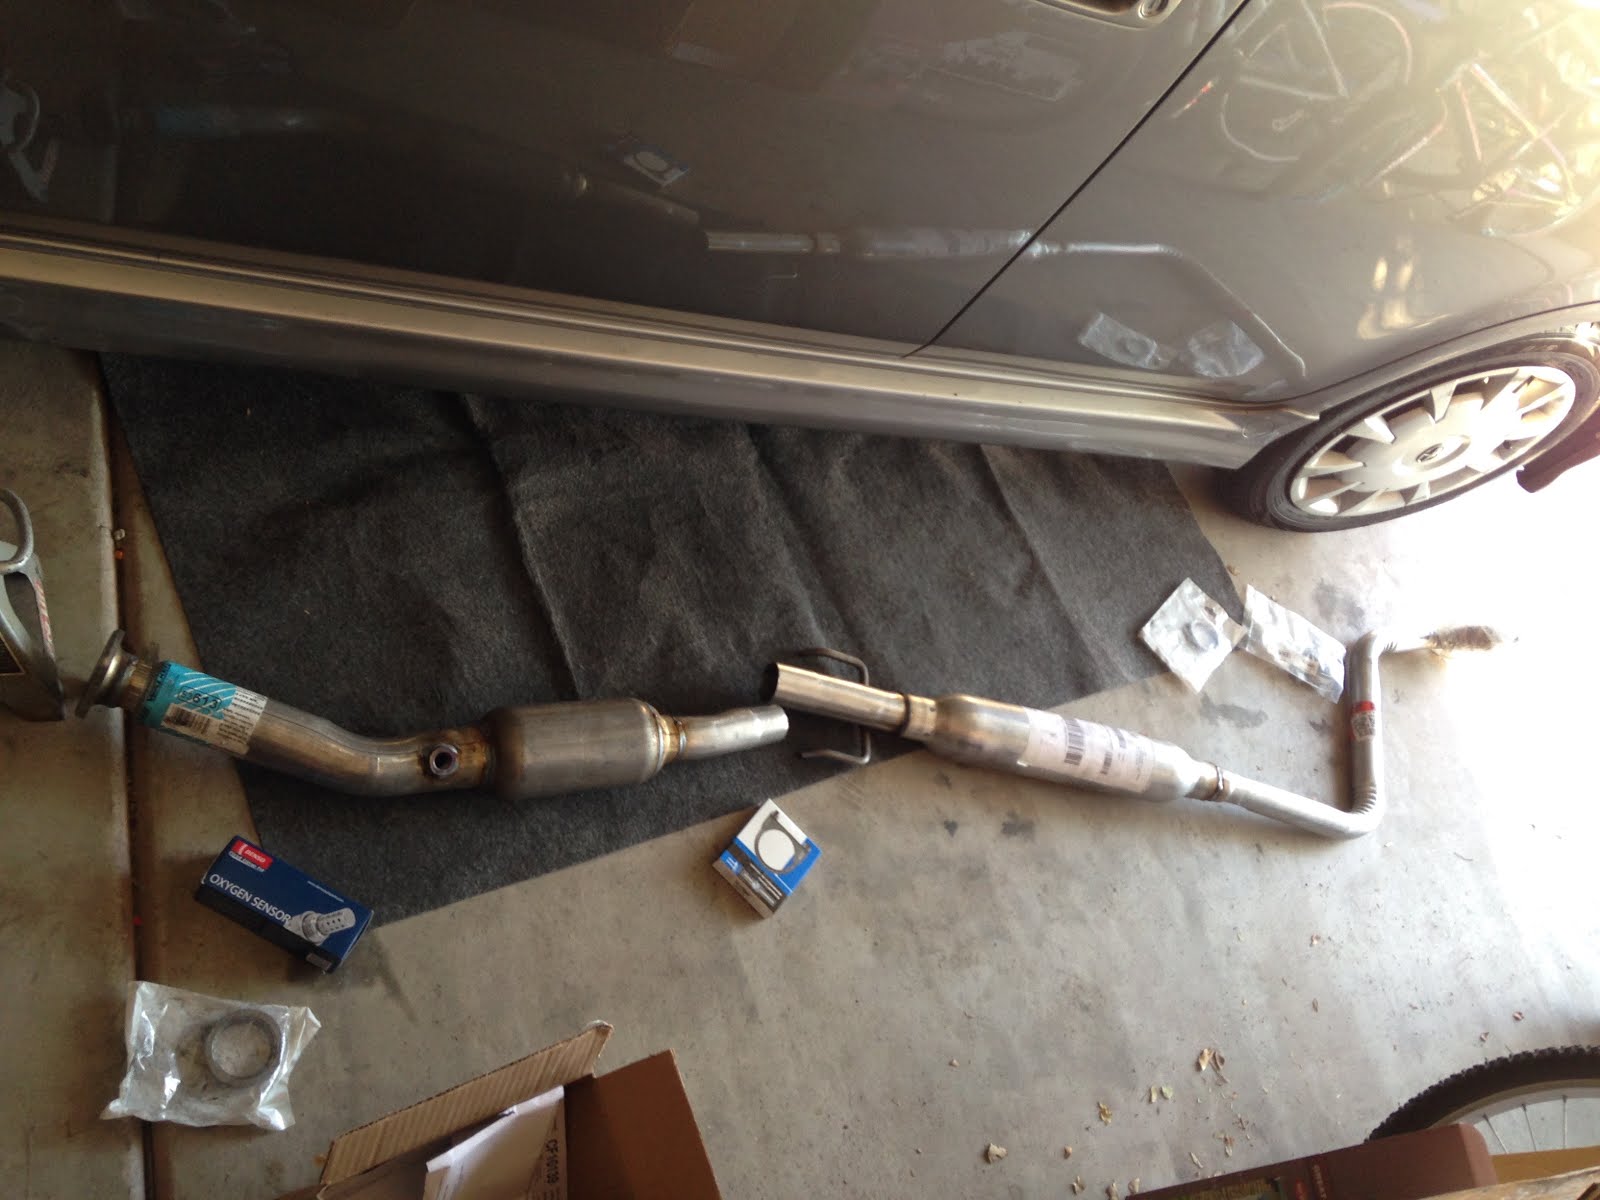 My Scion Toyota Lexus Life Exhaust Catalytic Converter And Resonator And A F Sensor Upstream,Second Year Anniversary Gift Cotton